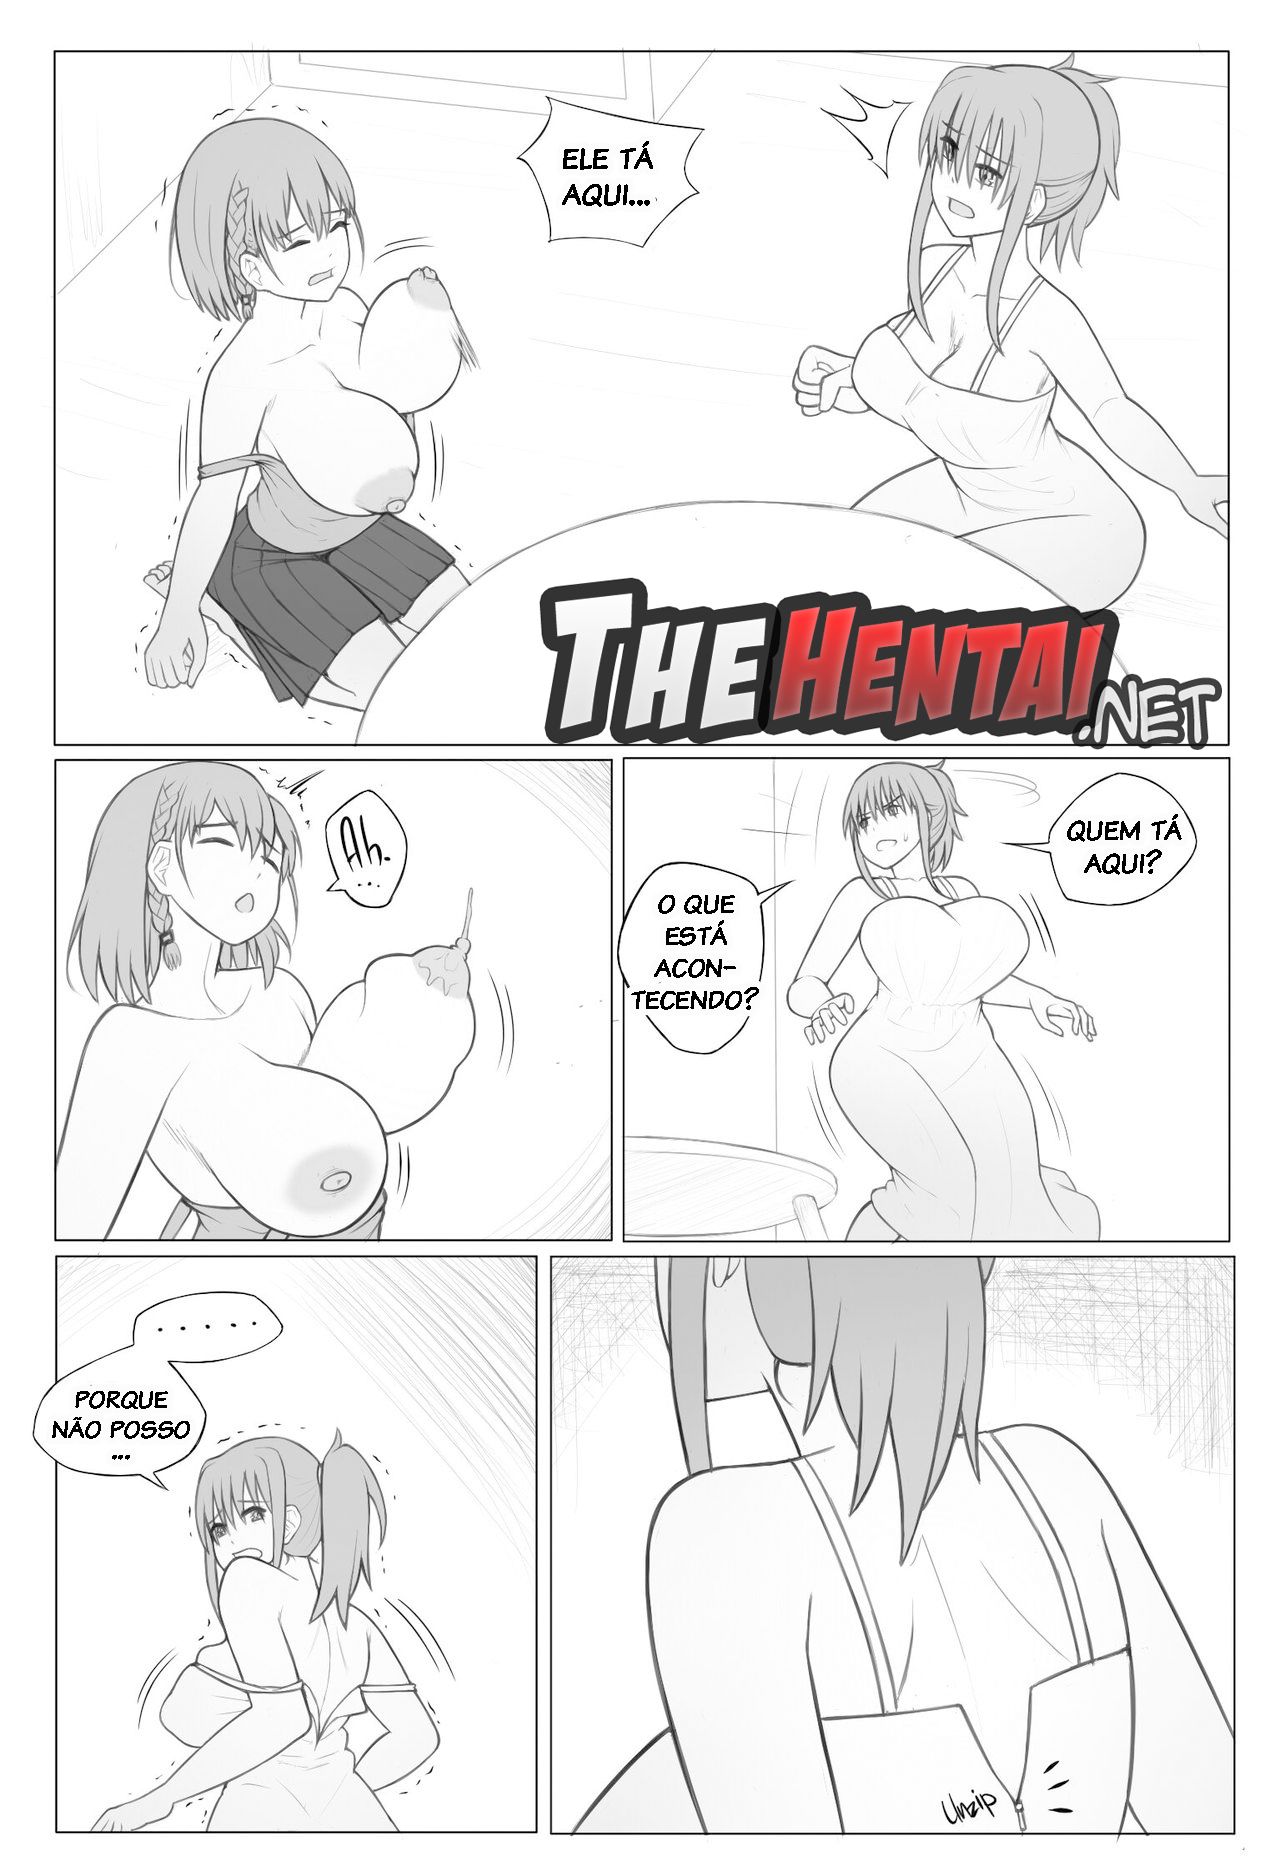 A Monday Night Haunting Hentai pt-br 17